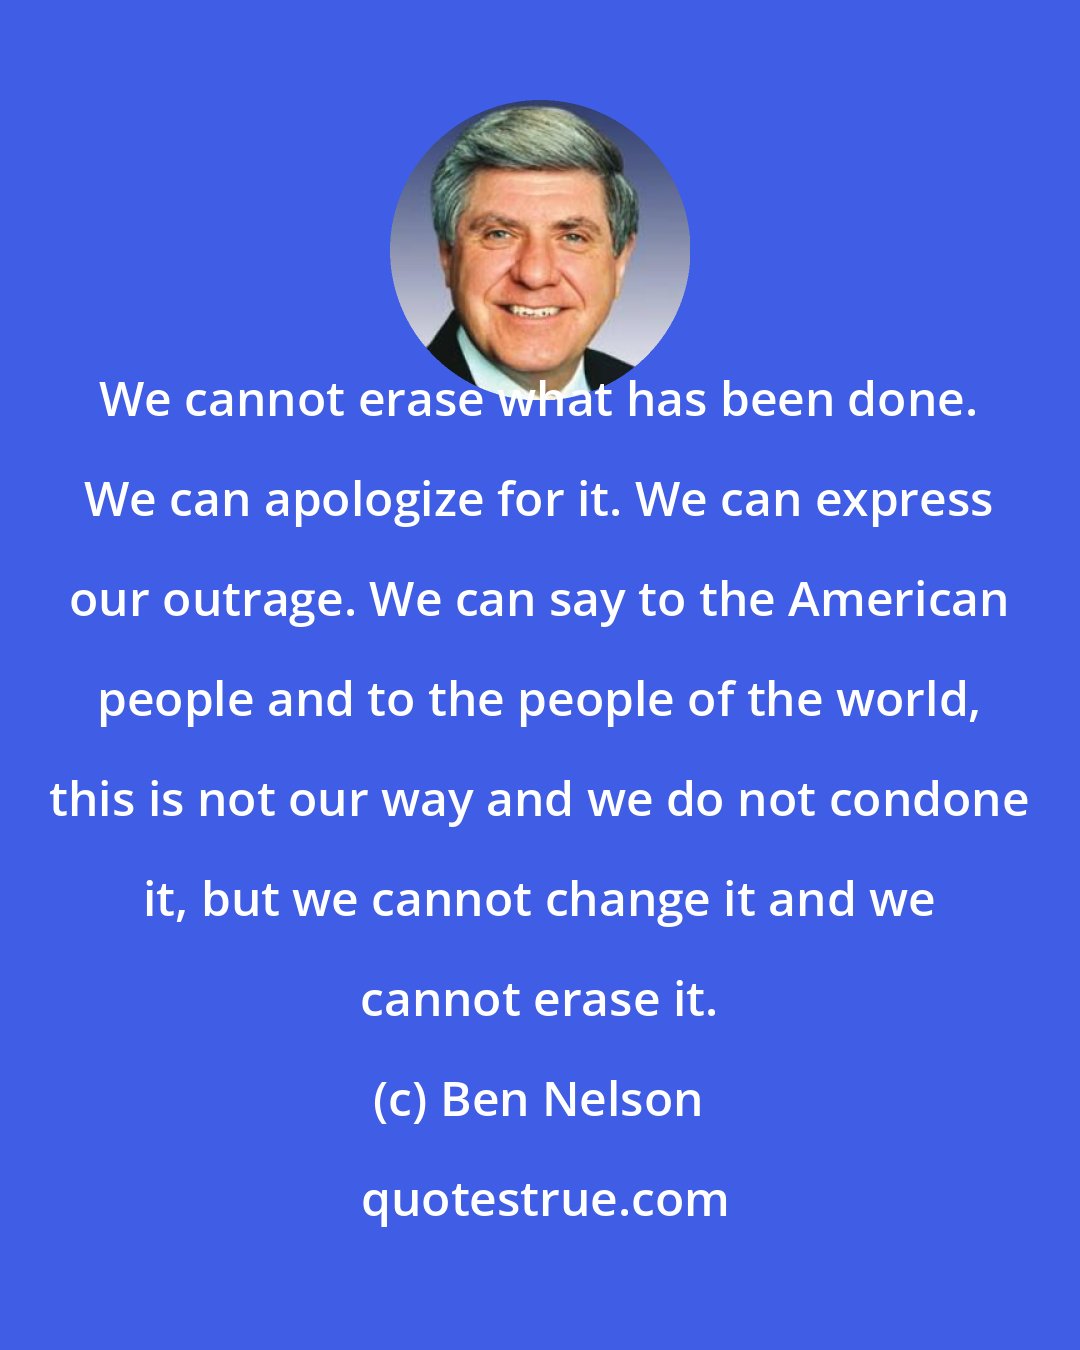 Ben Nelson: We cannot erase what has been done. We can apologize for it. We can express our outrage. We can say to the American people and to the people of the world, this is not our way and we do not condone it, but we cannot change it and we cannot erase it.